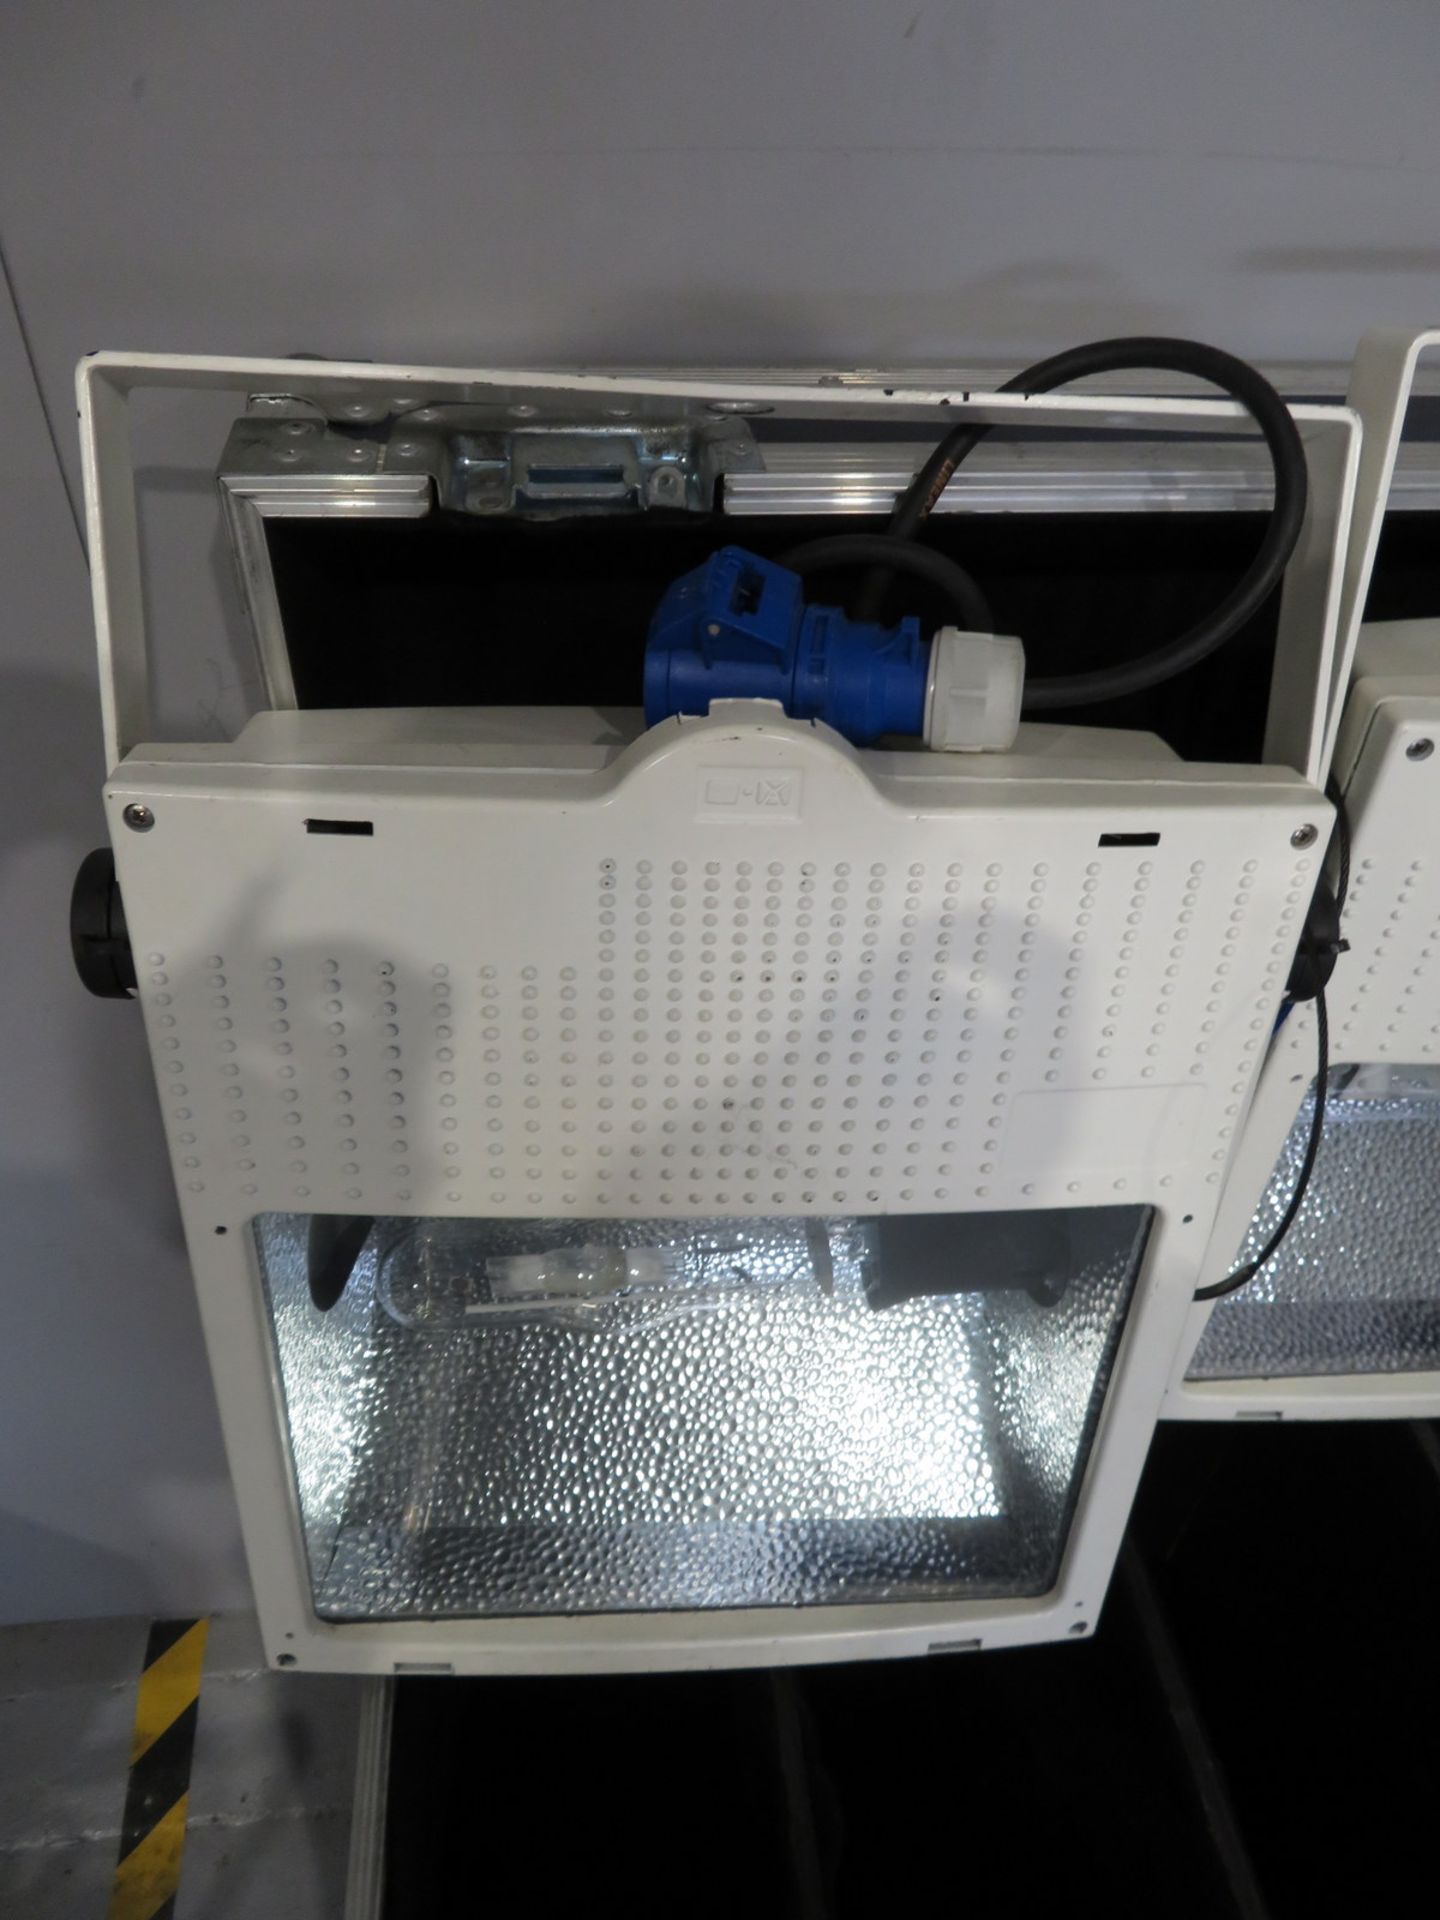 6x HQI 400w Floodlights in flight case. Includes safety bonds. Working condition. - Image 5 of 6